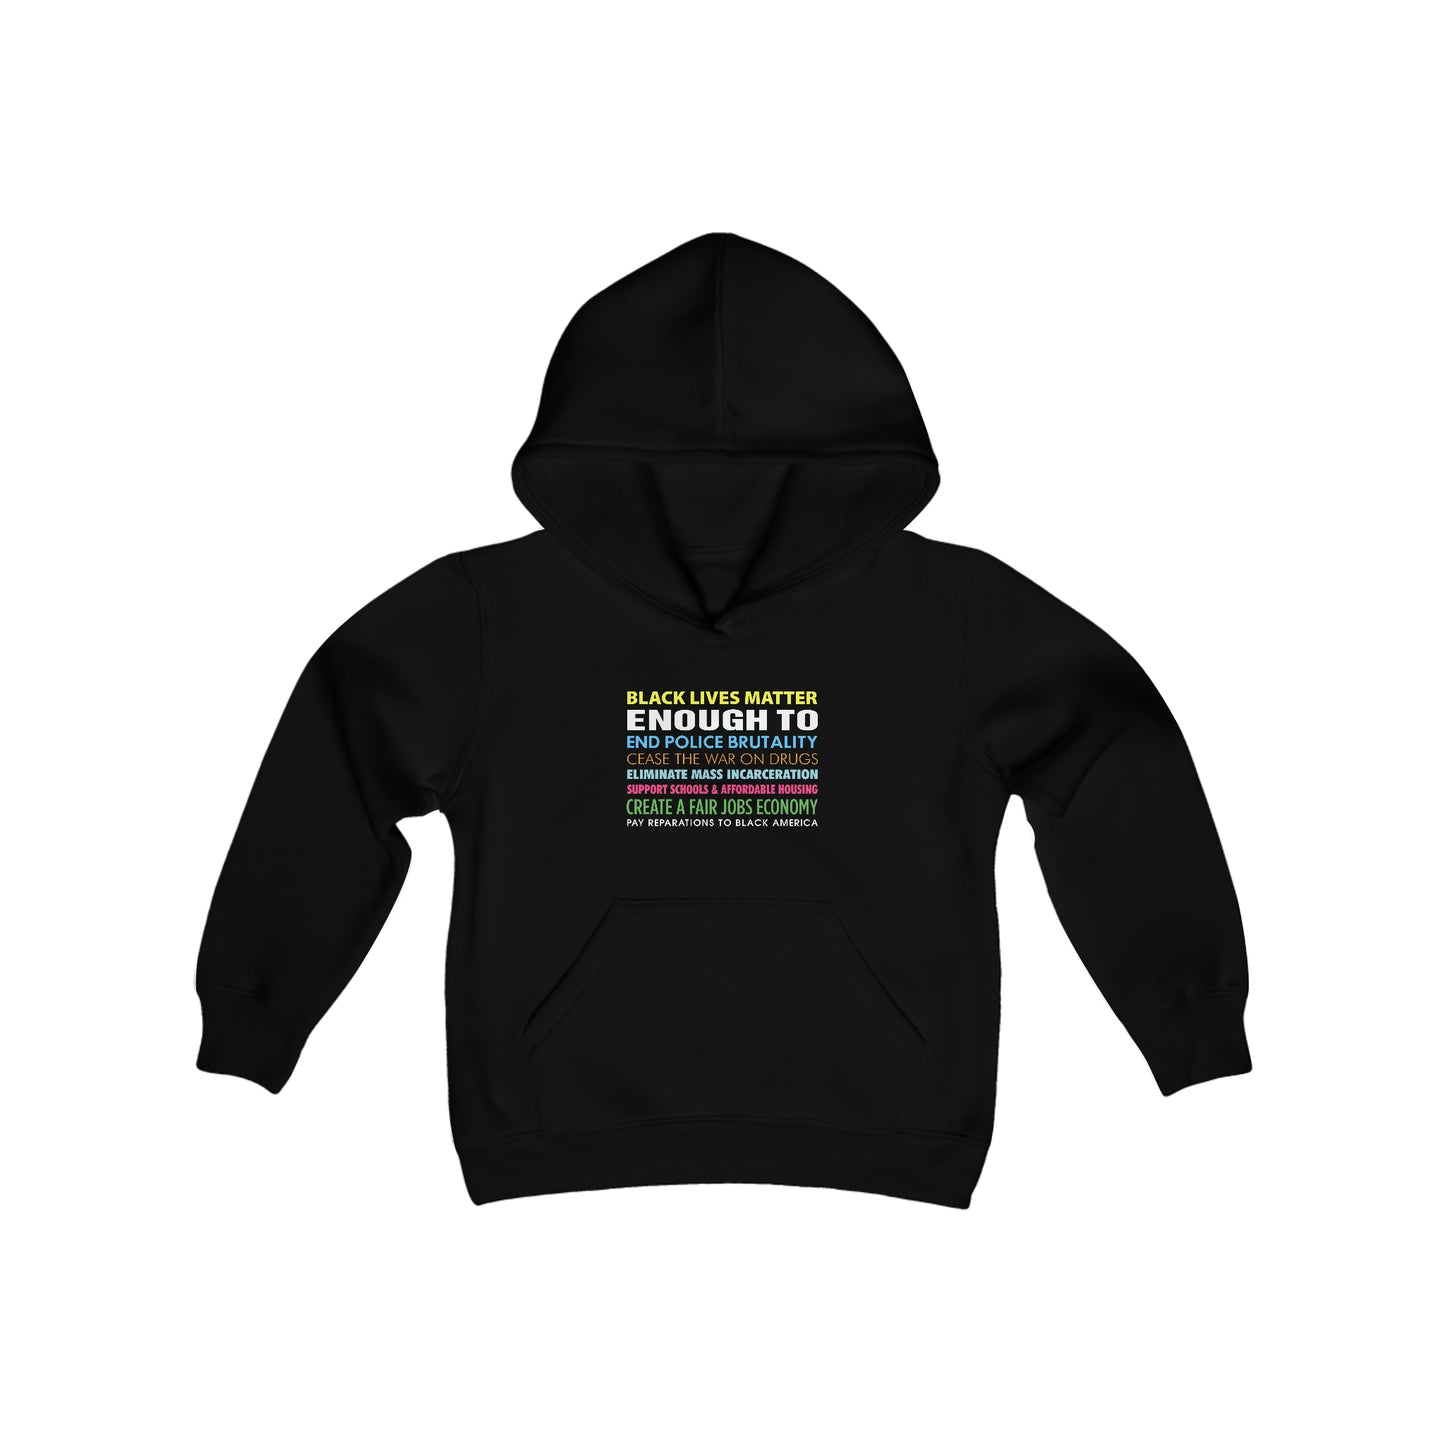 “Black Lives Matter Enough To” Youth Hoodie